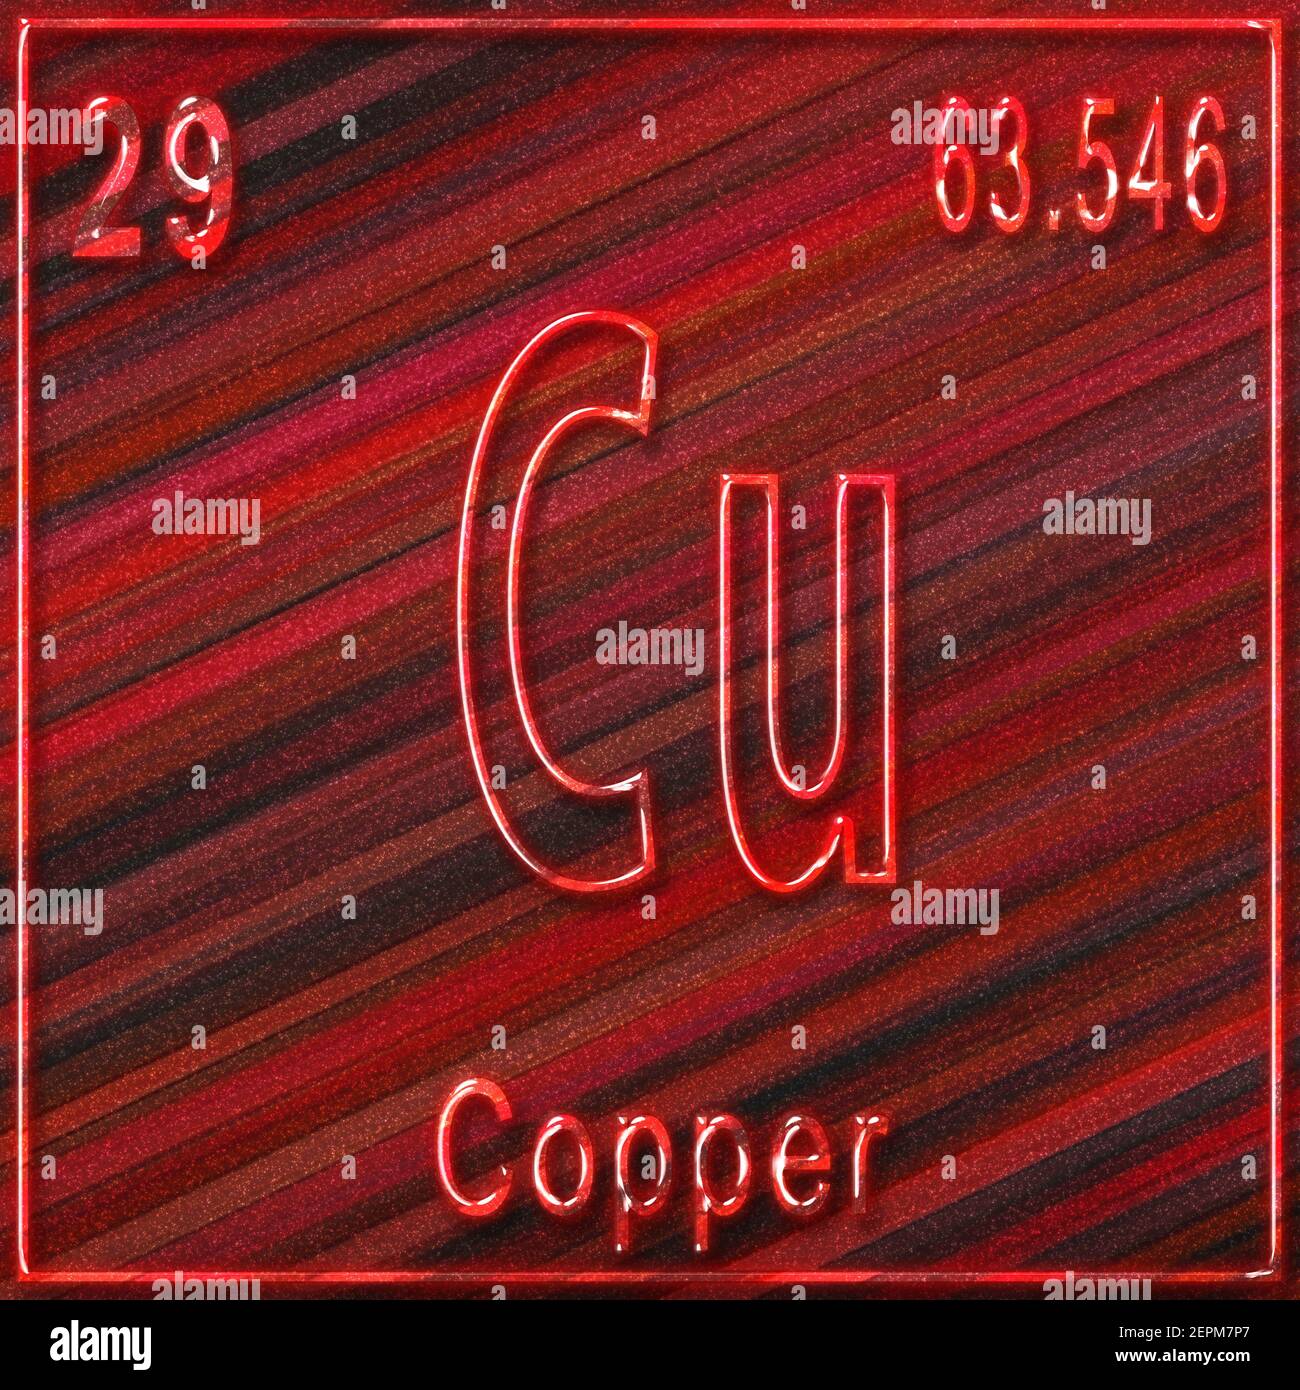 Copper Chemical Element Sign With Atomic Number And Atomic Weight